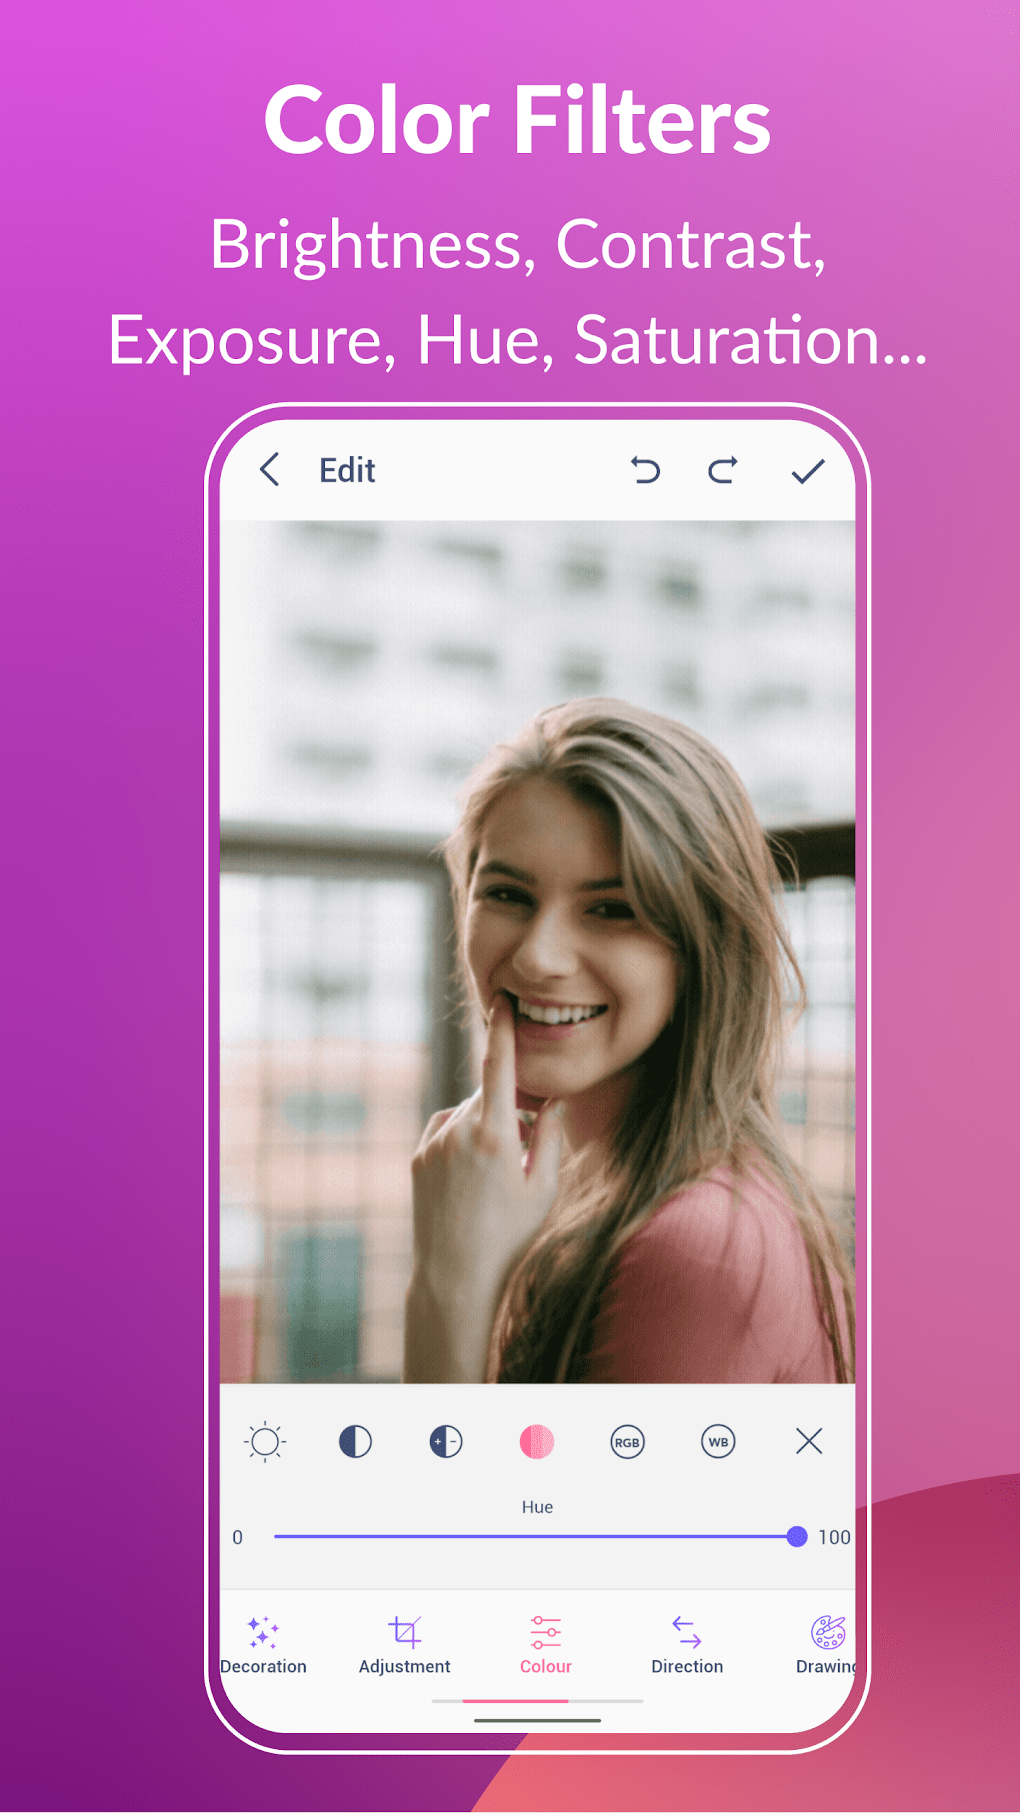 GIF Maker, GIF Editor APK for Android Download